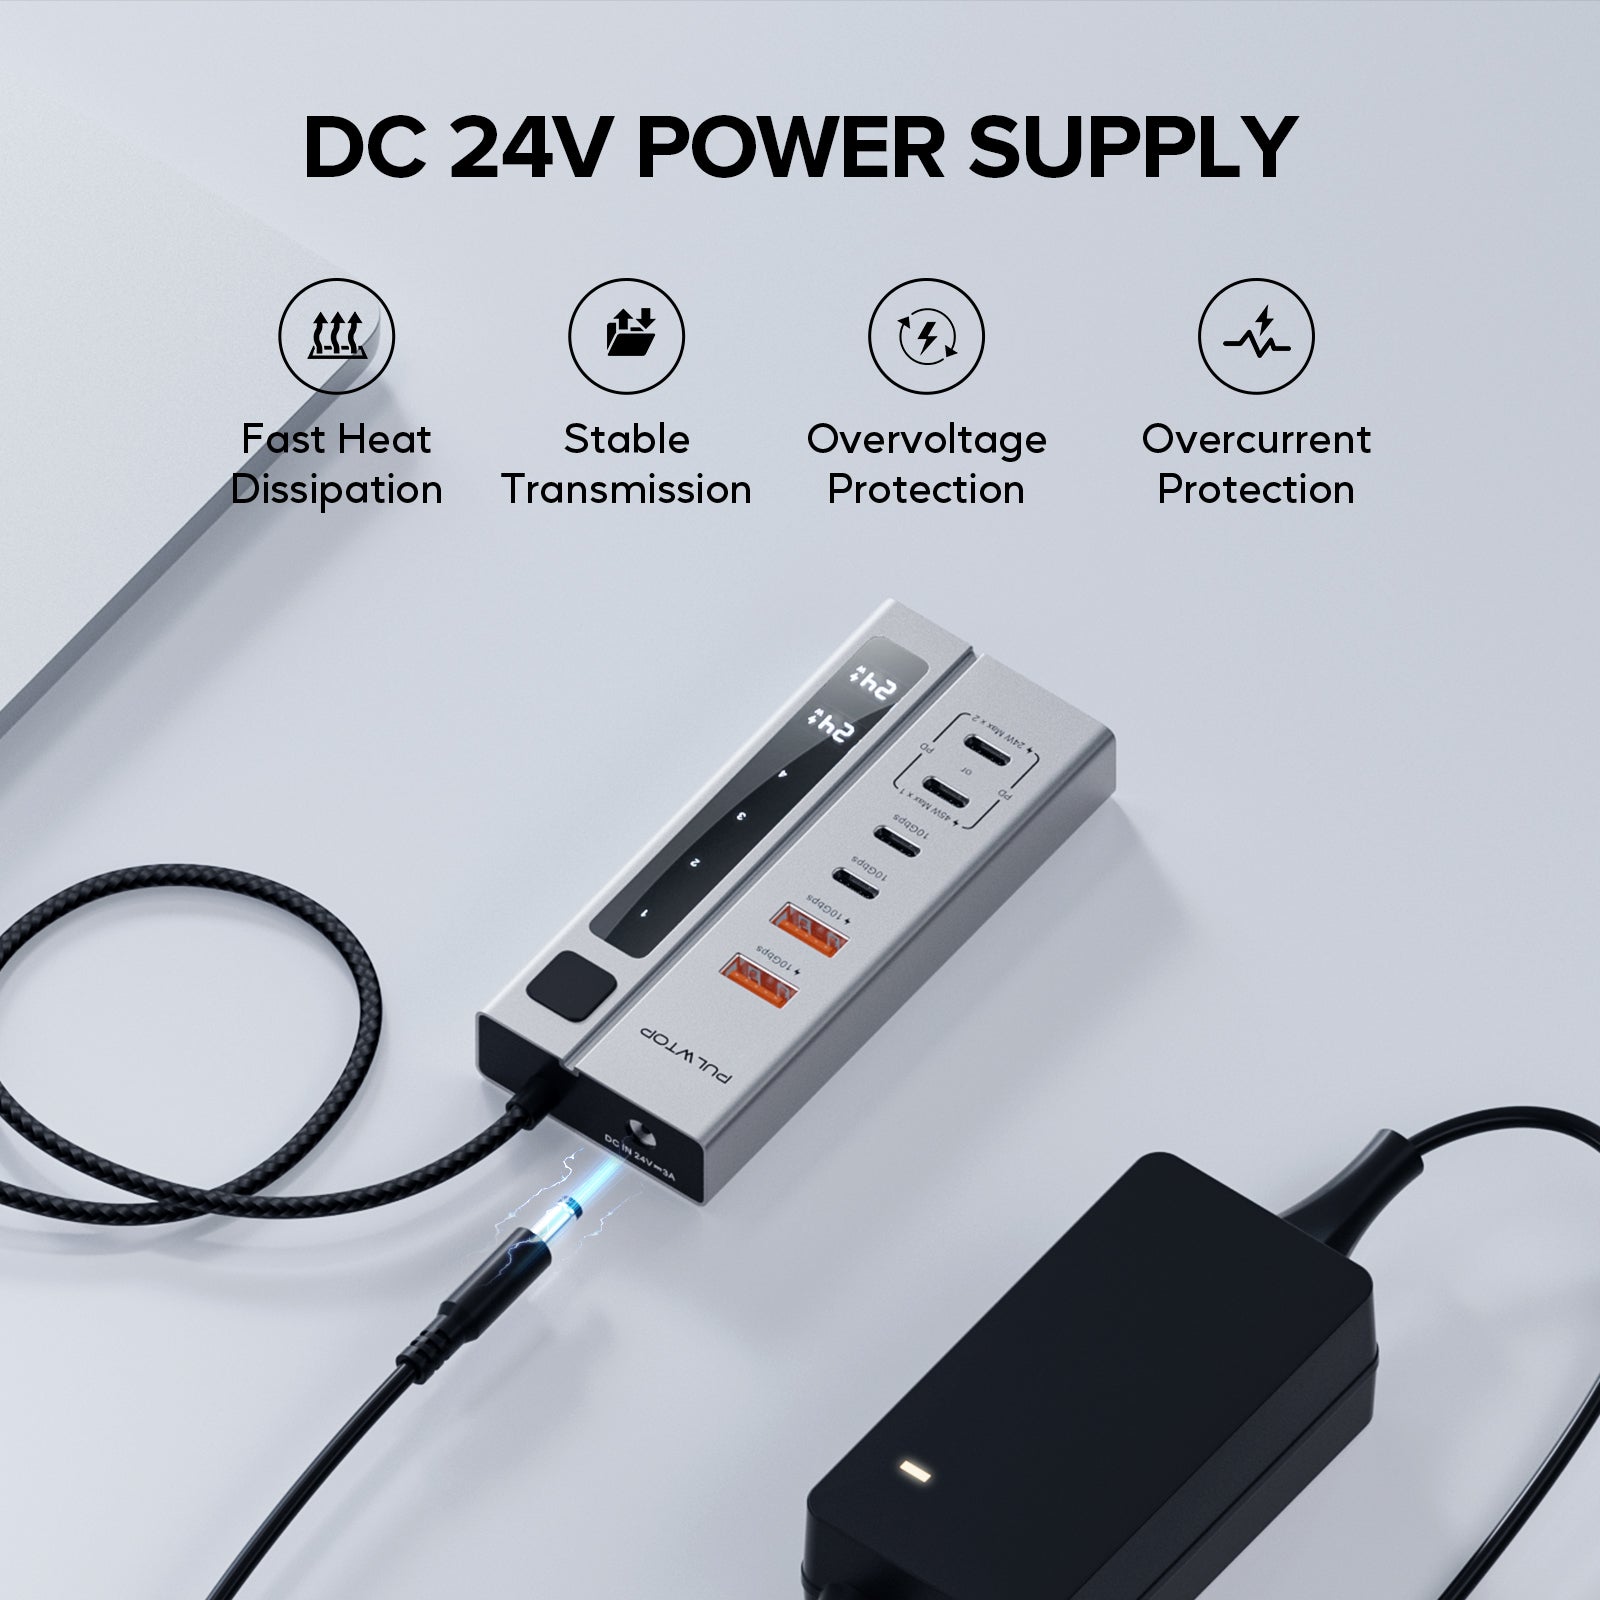 PULWTOP Powered USB C Hub with 72W Power Adapter, 10Gbps and 45W (Max) USB C Hub for MacBook, iMac, iPad, Phone (Not for Video)